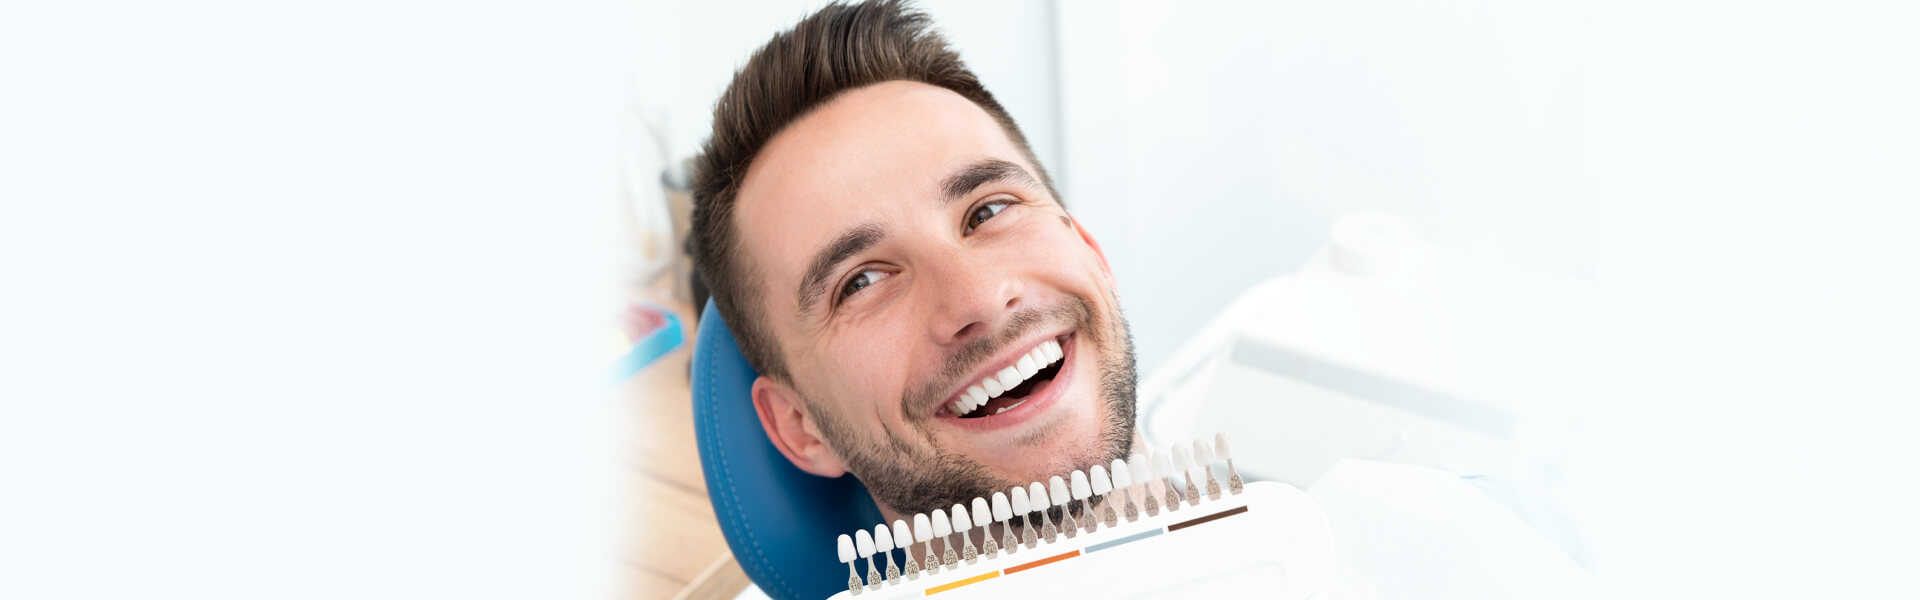 Care after Dental Veneers: Five Tips to Help You